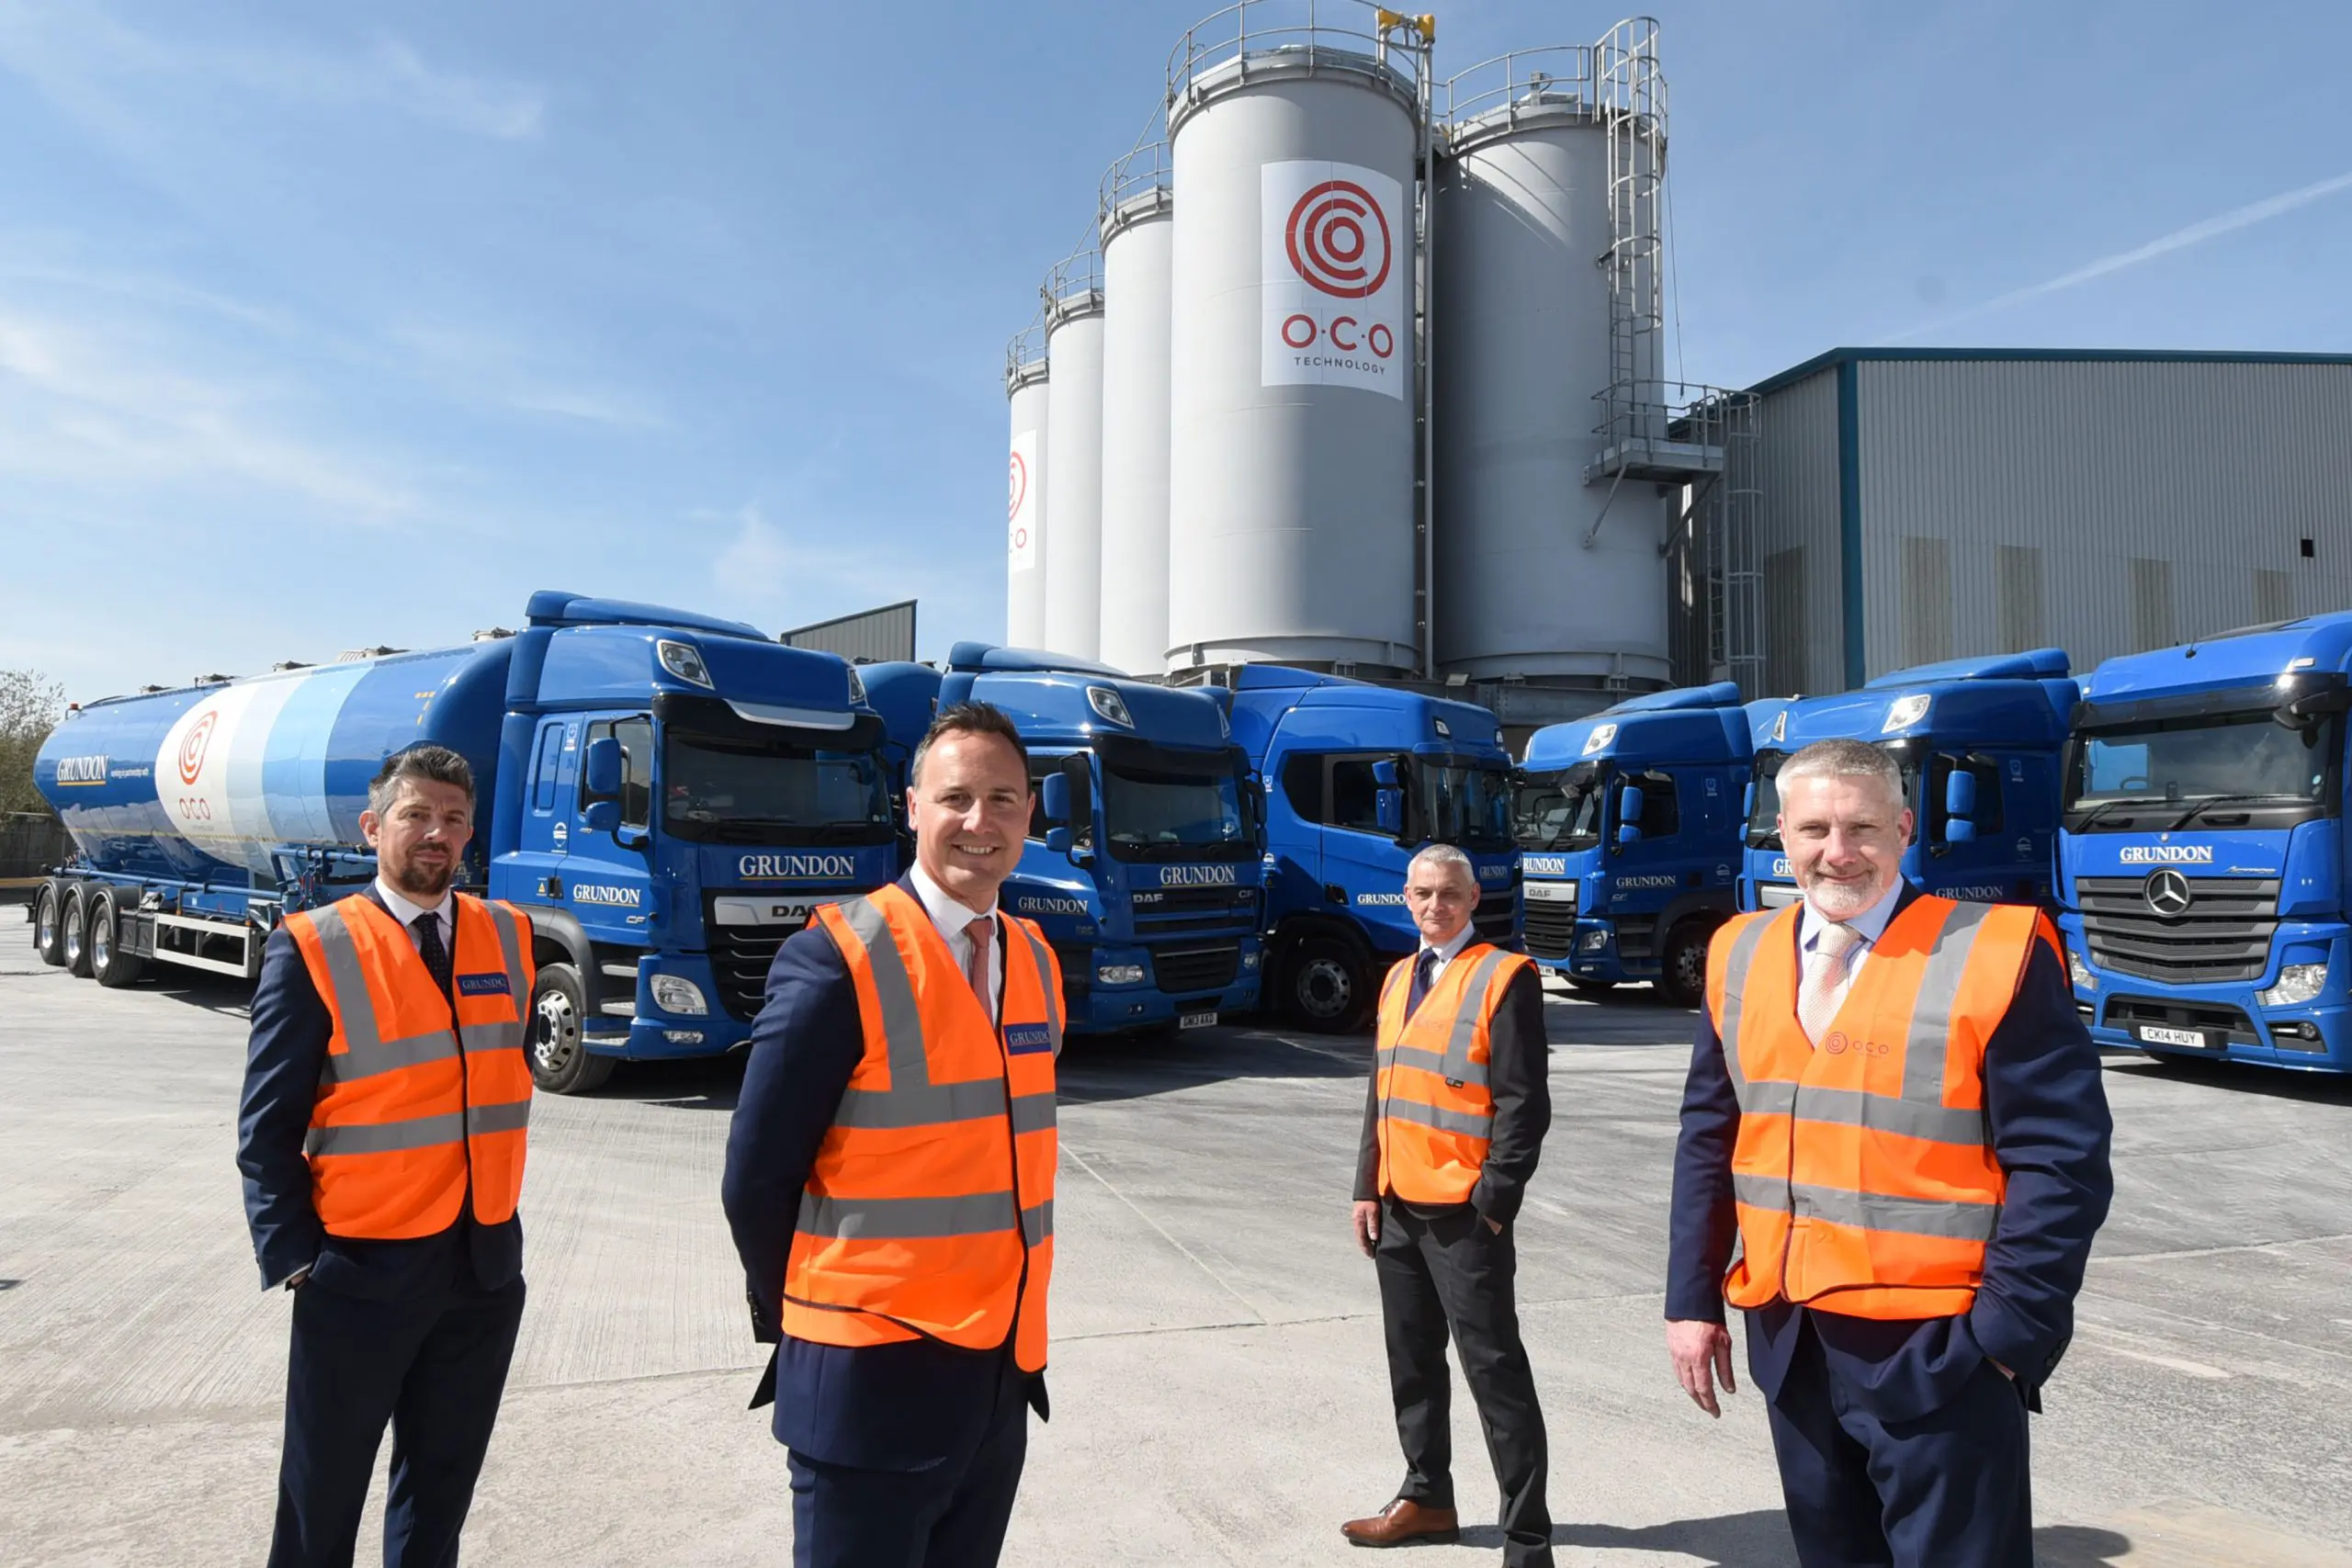 Pictured at O.C.O’s Avonmouth facility with the tanker fleet in the background, are (from left)  Richard Van-Den-Heule, Grundon’s Depot Operations Manager at Bishop's Cleeve; Bradley Smith, Grundon’s Sales & Marketing Director; Paul Barber, General Manager – Operations at O.C.O, and Steve Greig, O.C.O’s Managing Director.